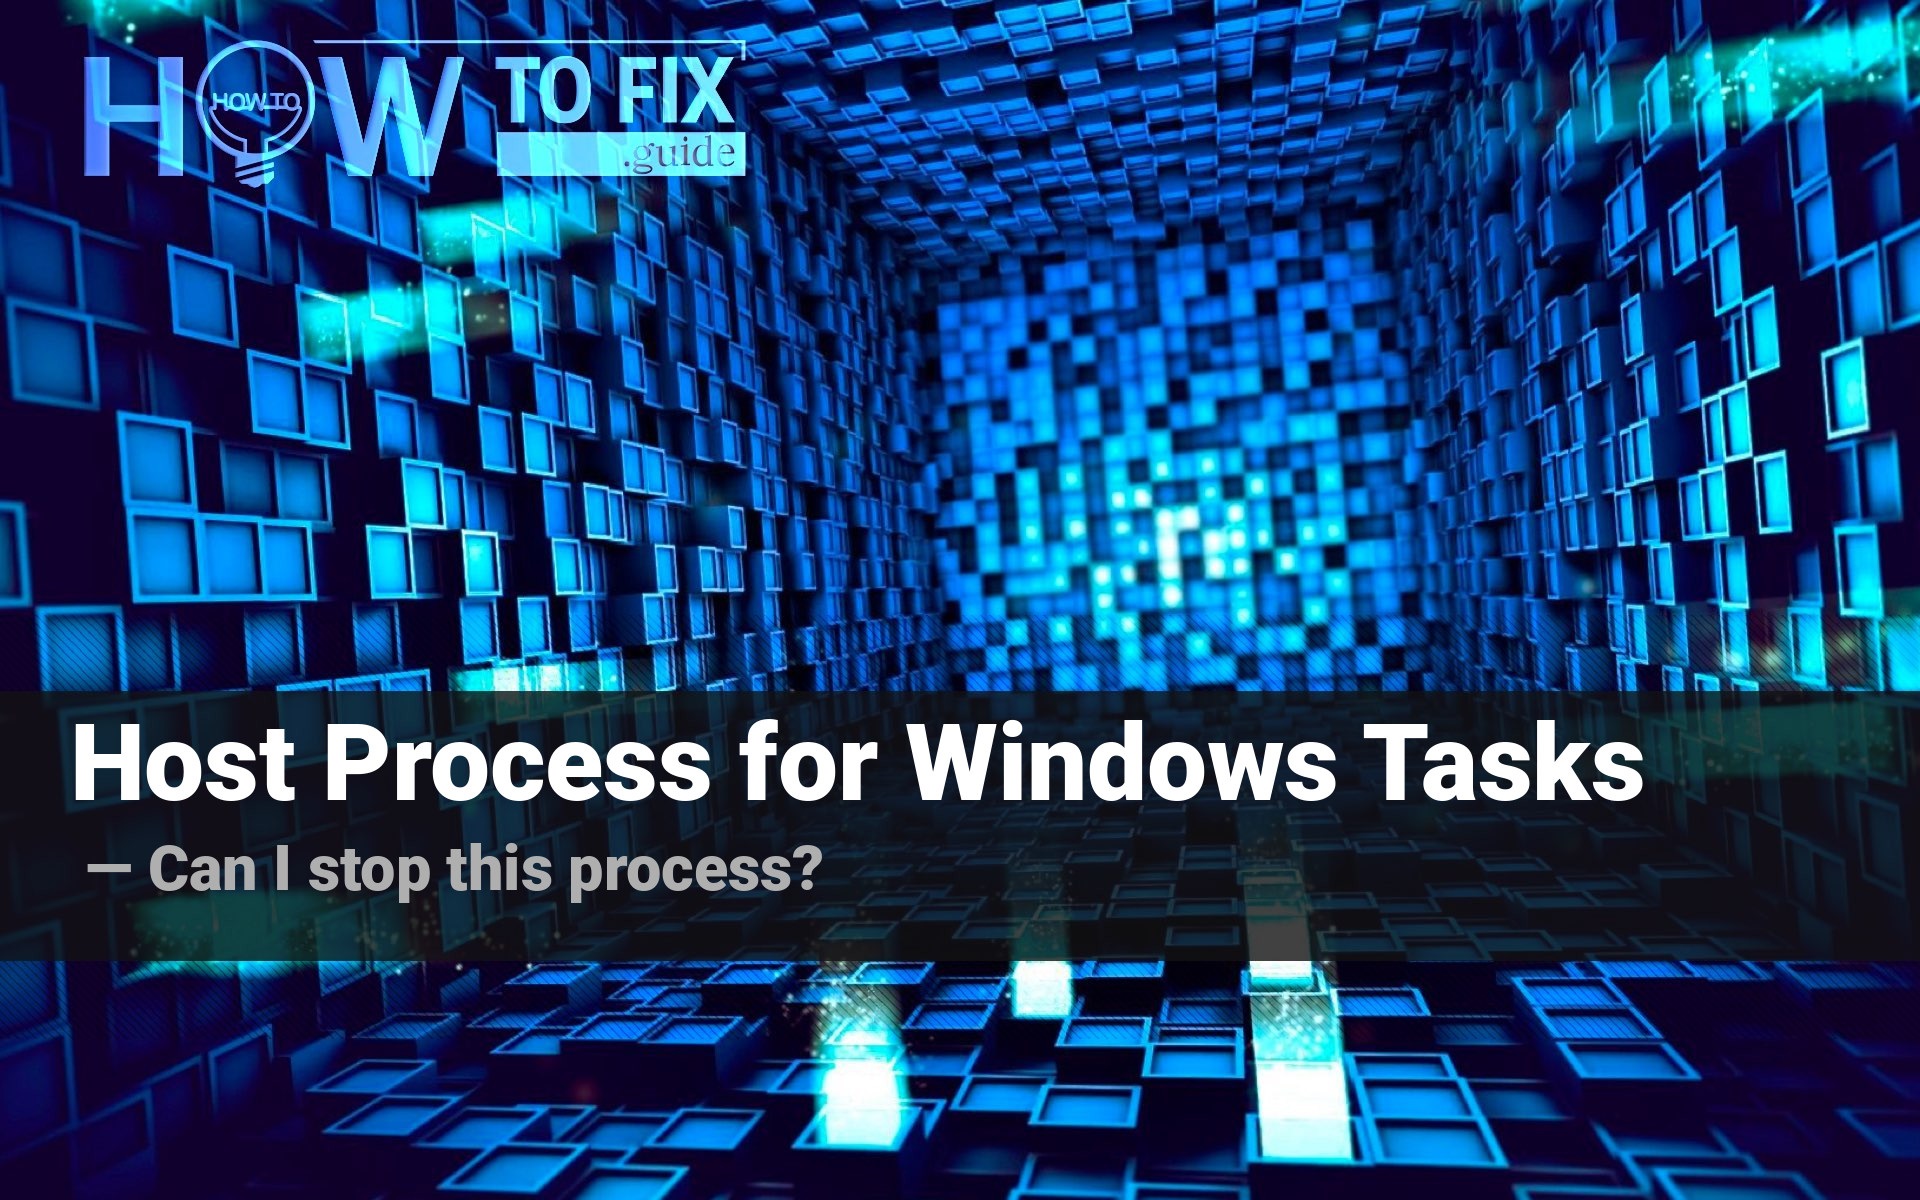 What is Host Process for Windows Tasks?